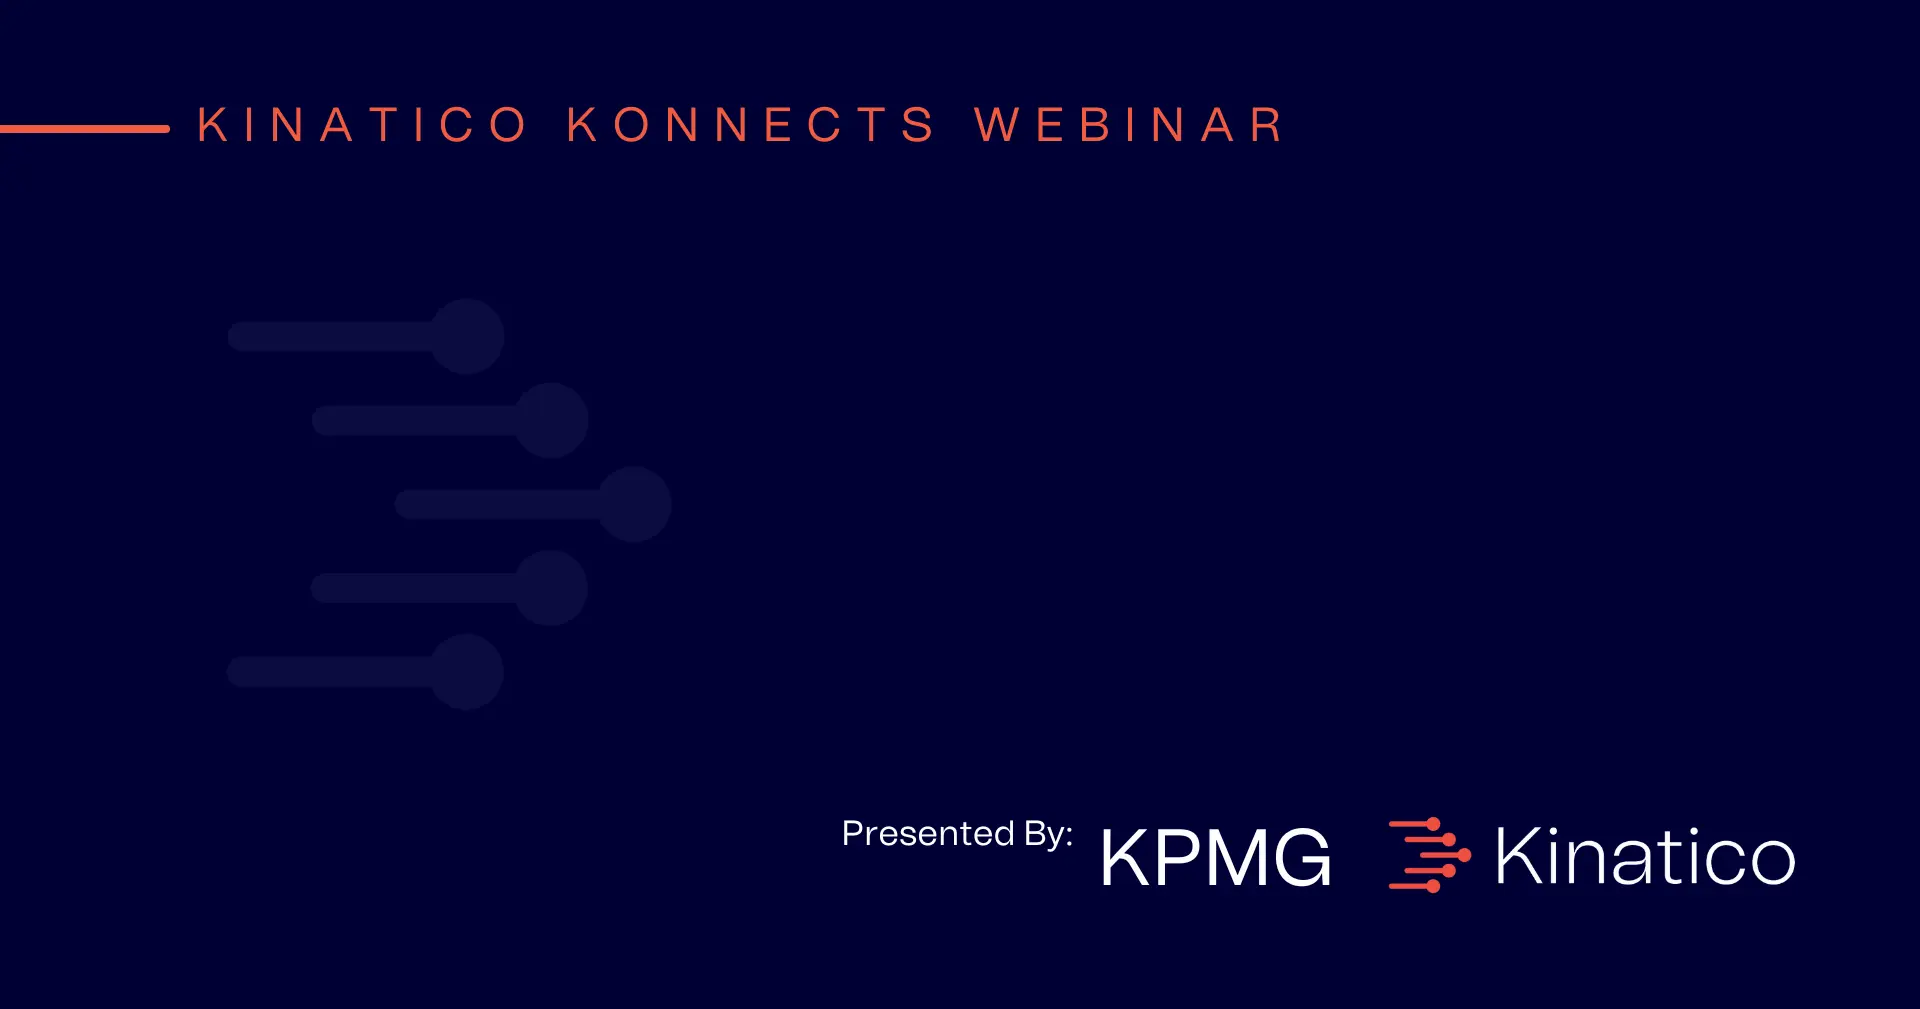 Kinatico Konnects Webinar Blog about embedding the new obligations in the SOCI Act as part of your ongoing risk-based approach to increasing operational resilience.